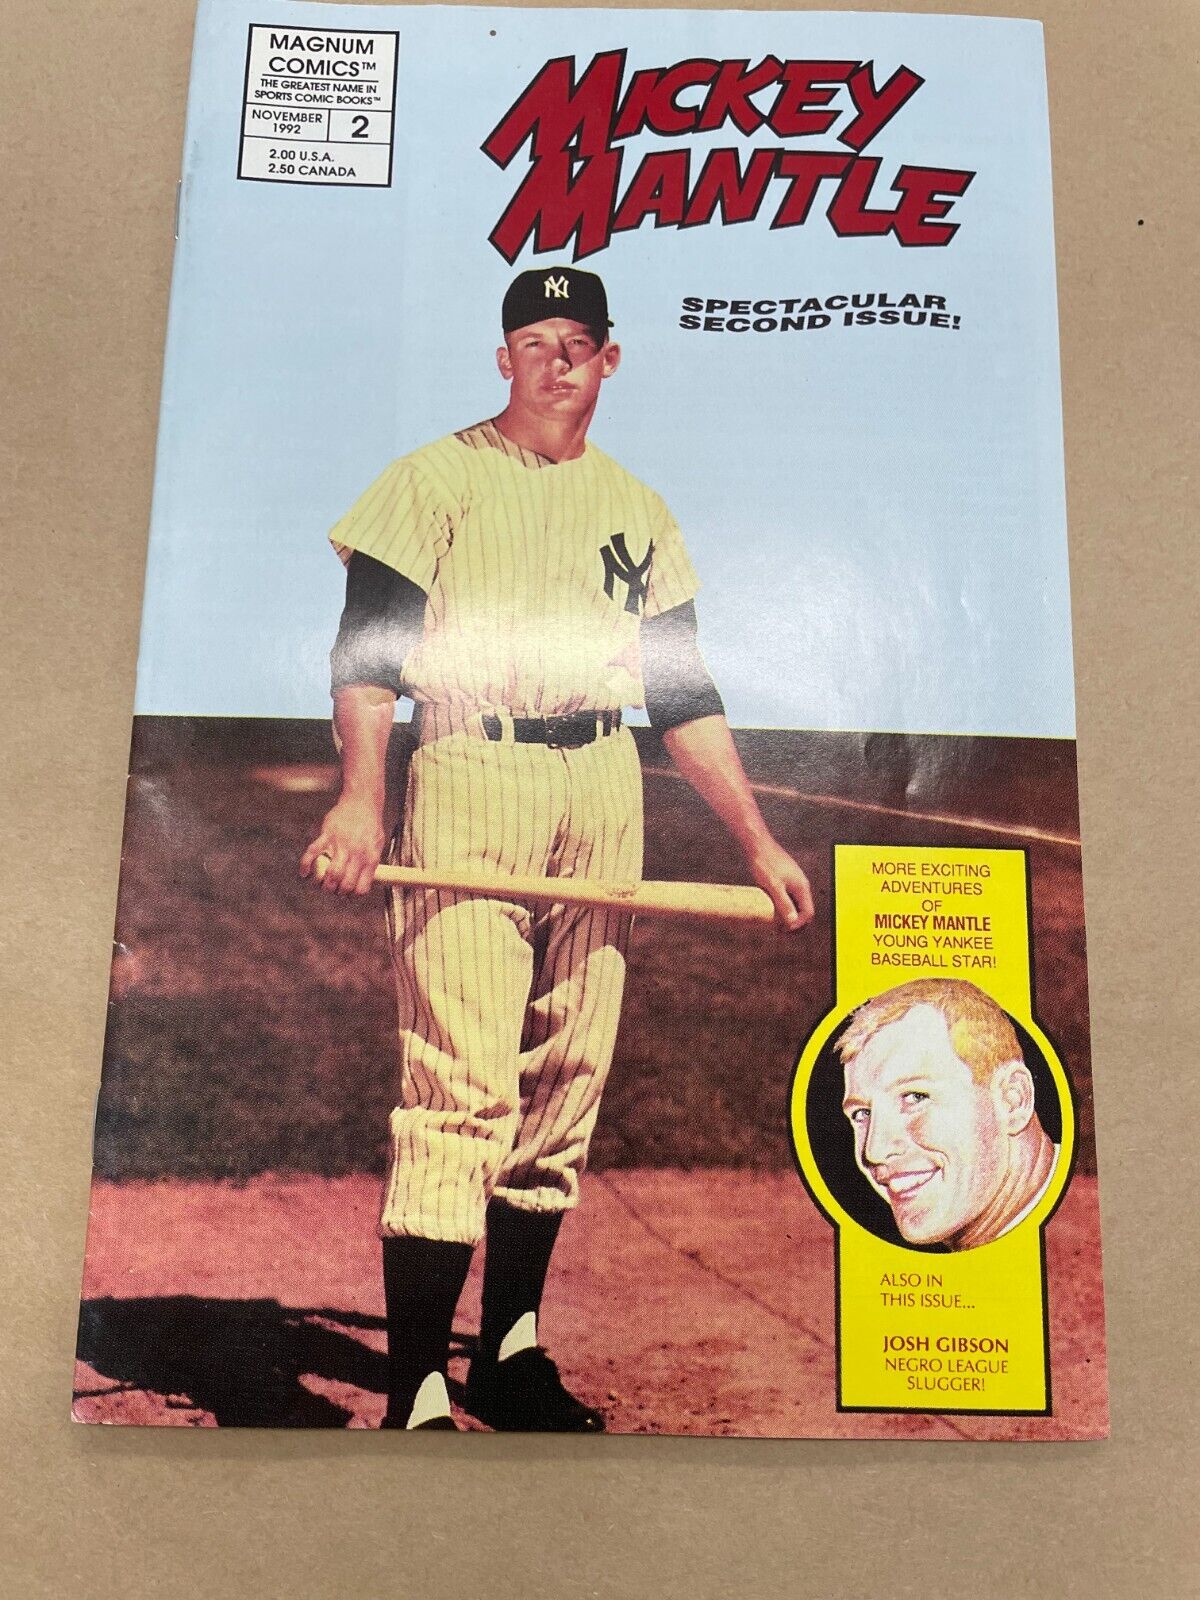 Magnum Comics - Mickey Mantle - 1992 Comic Book *FREE SHIPPING*